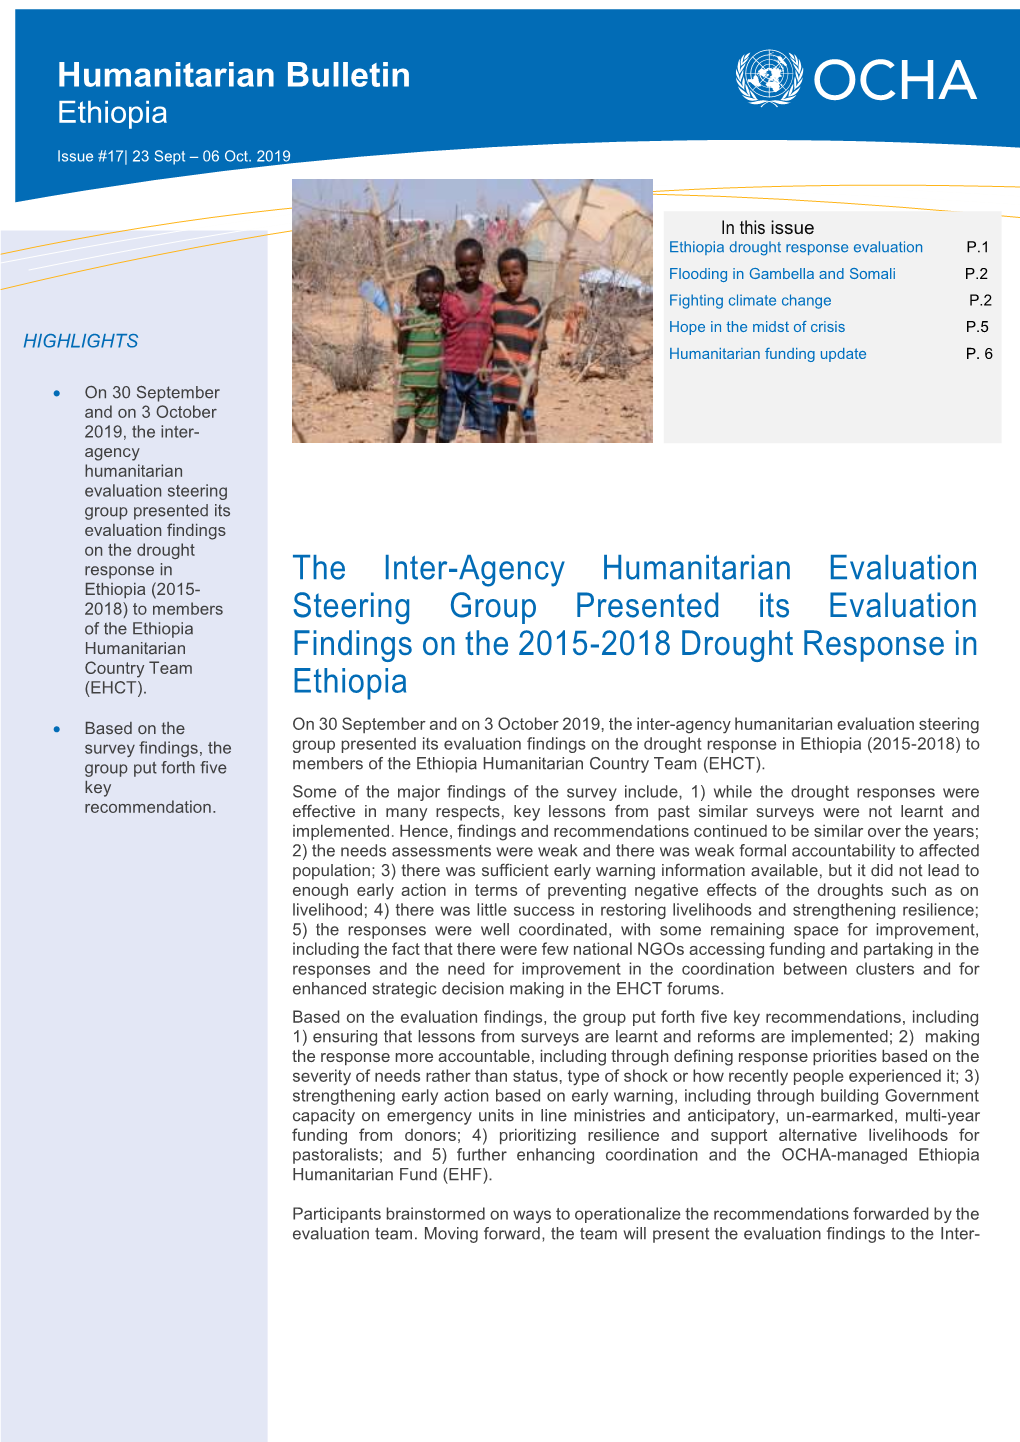 The Inter-Agency Humanitarian Evaluation Steering Group